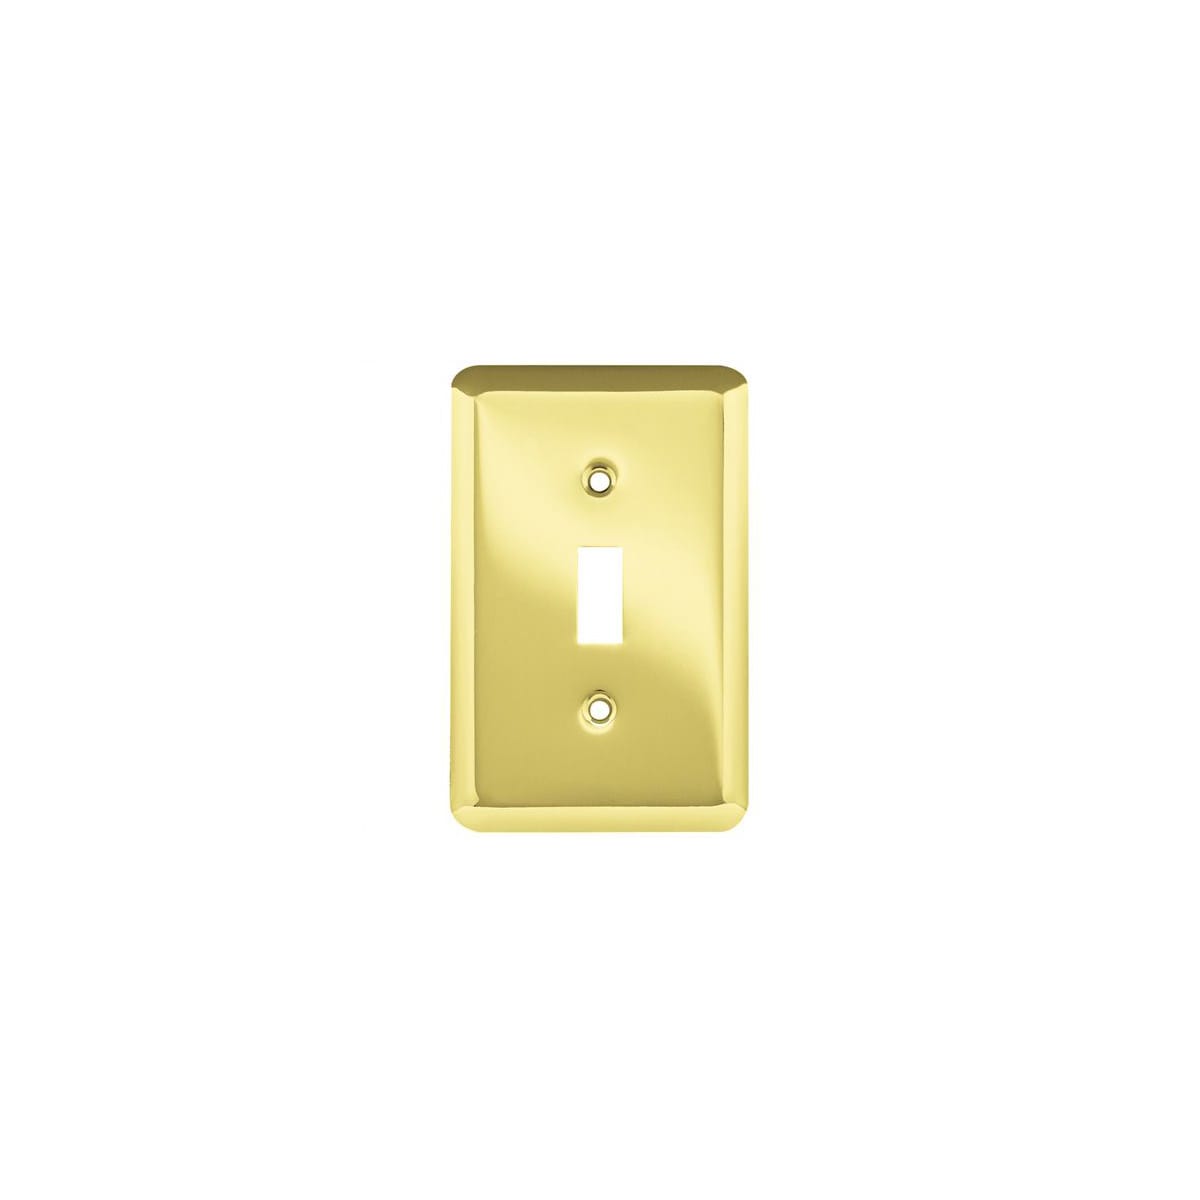 Polished Brass Franklin Brass W10245-PB-C Stamped Round Single Toggle Switch Wall Plate//Switch Plate//Cover